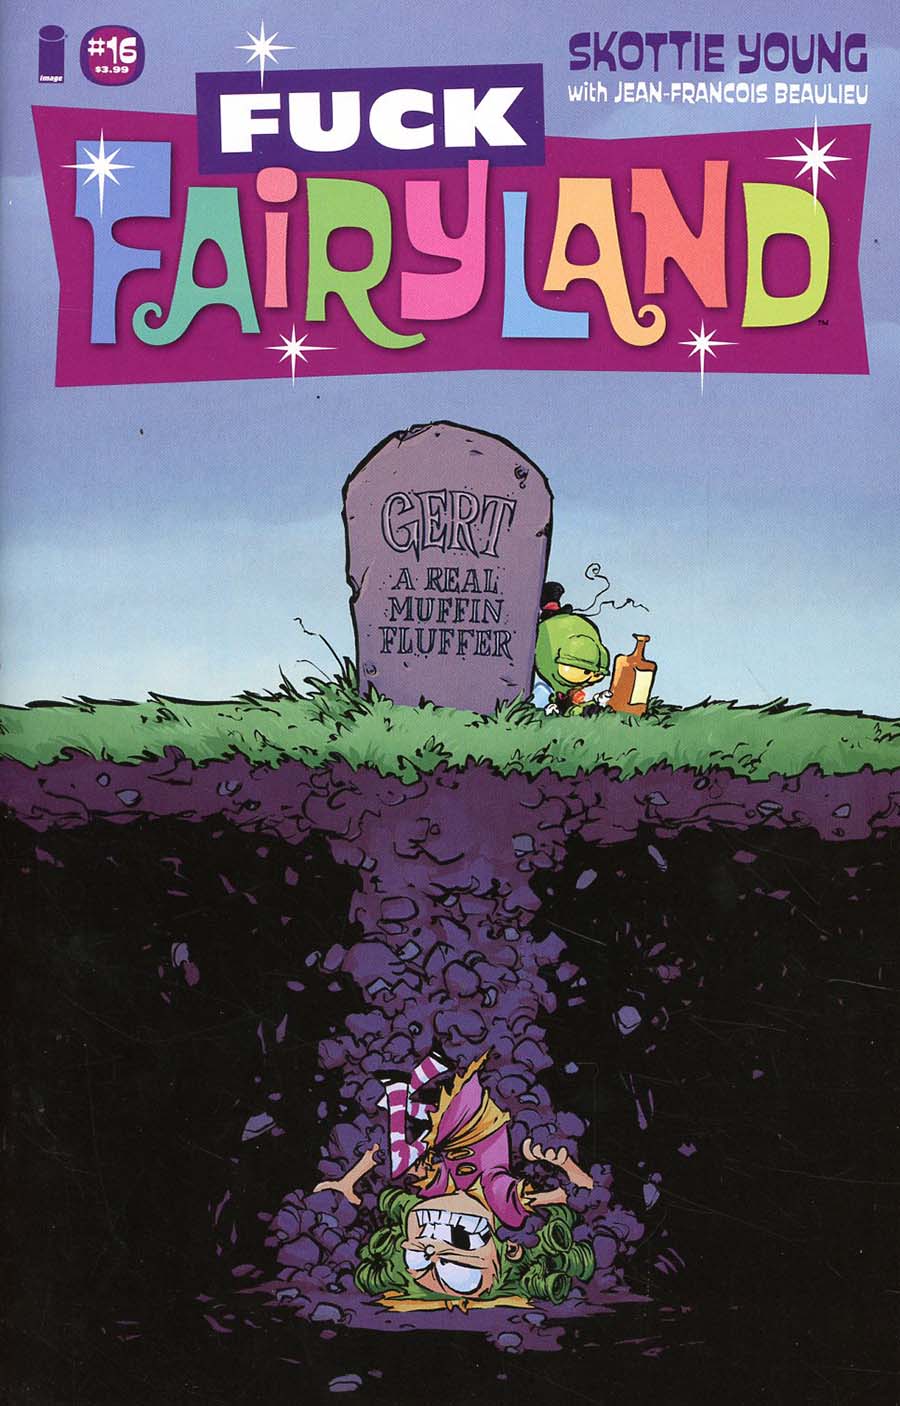 I Hate Fairyland #16 Cover B Variant Skottie Young F*ck Fairyland Cover